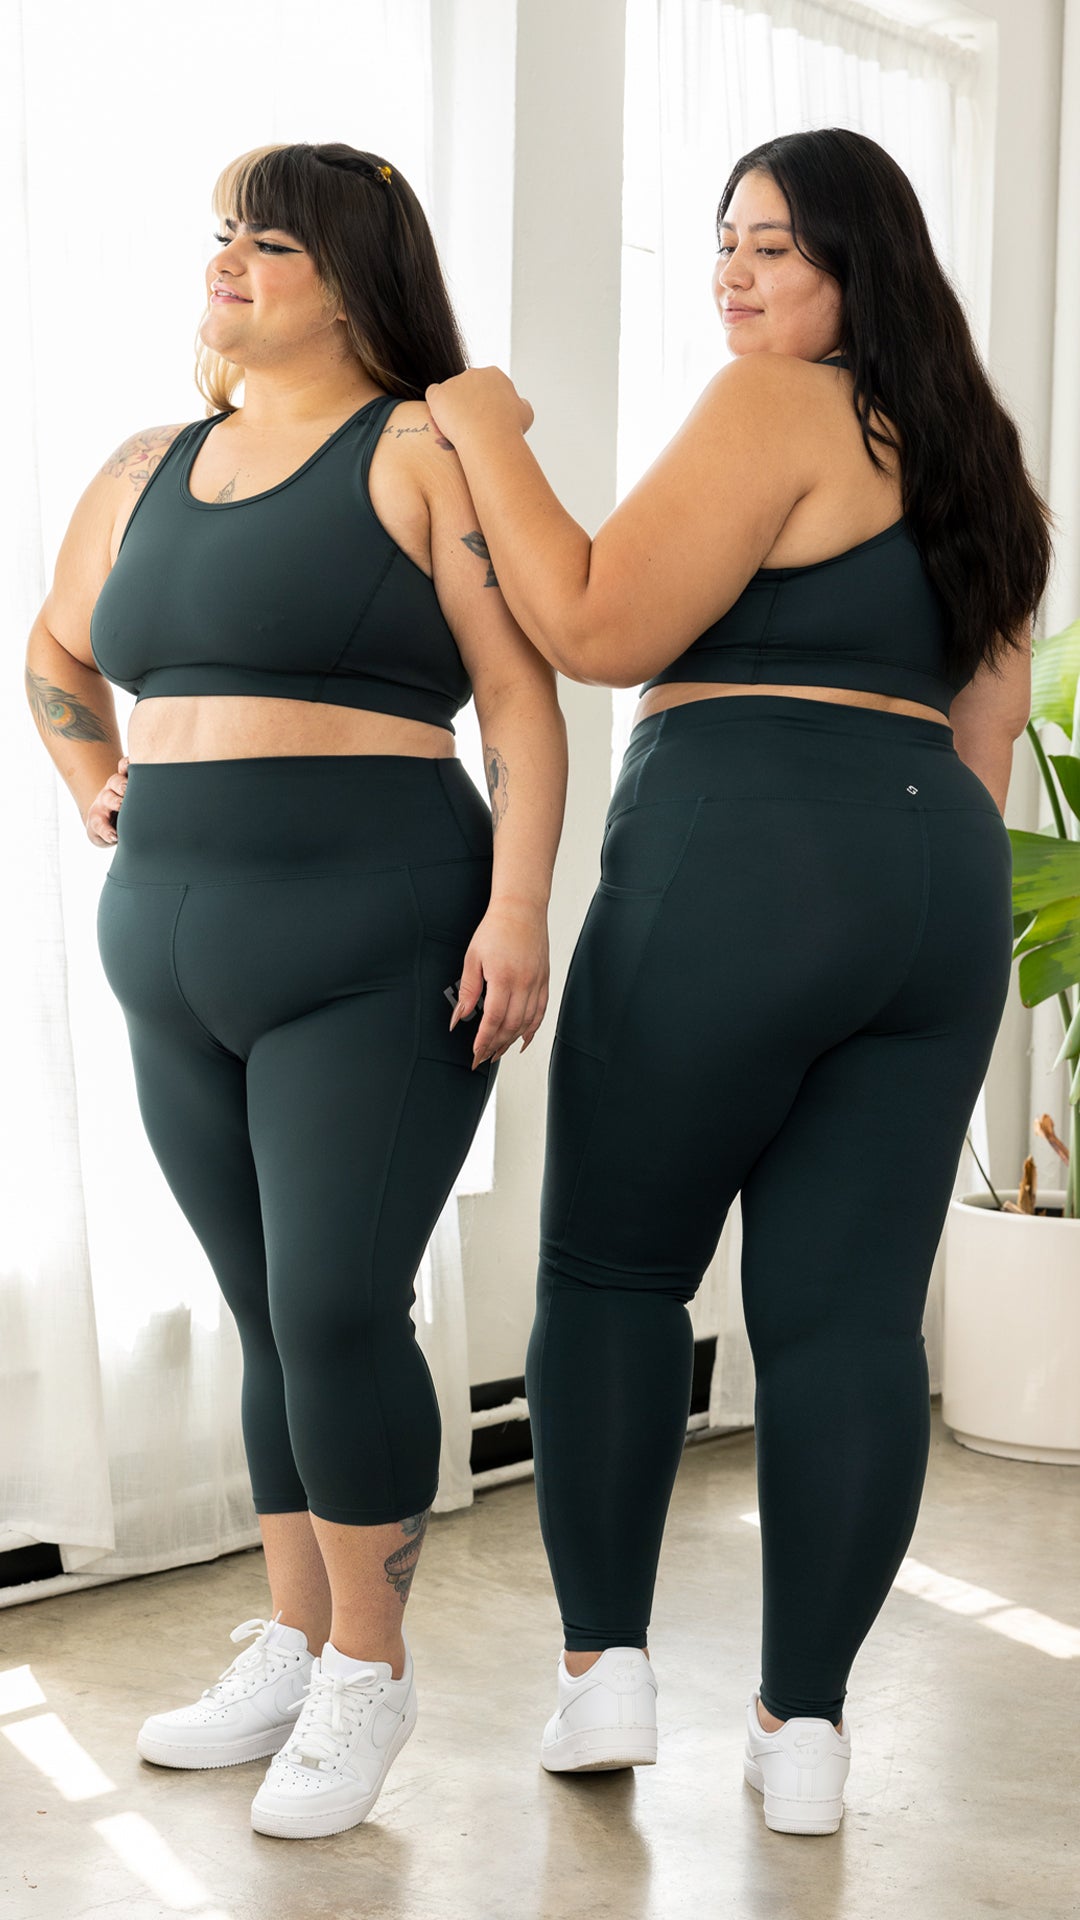 ALONG FIT Yoga Pants- Product Review 